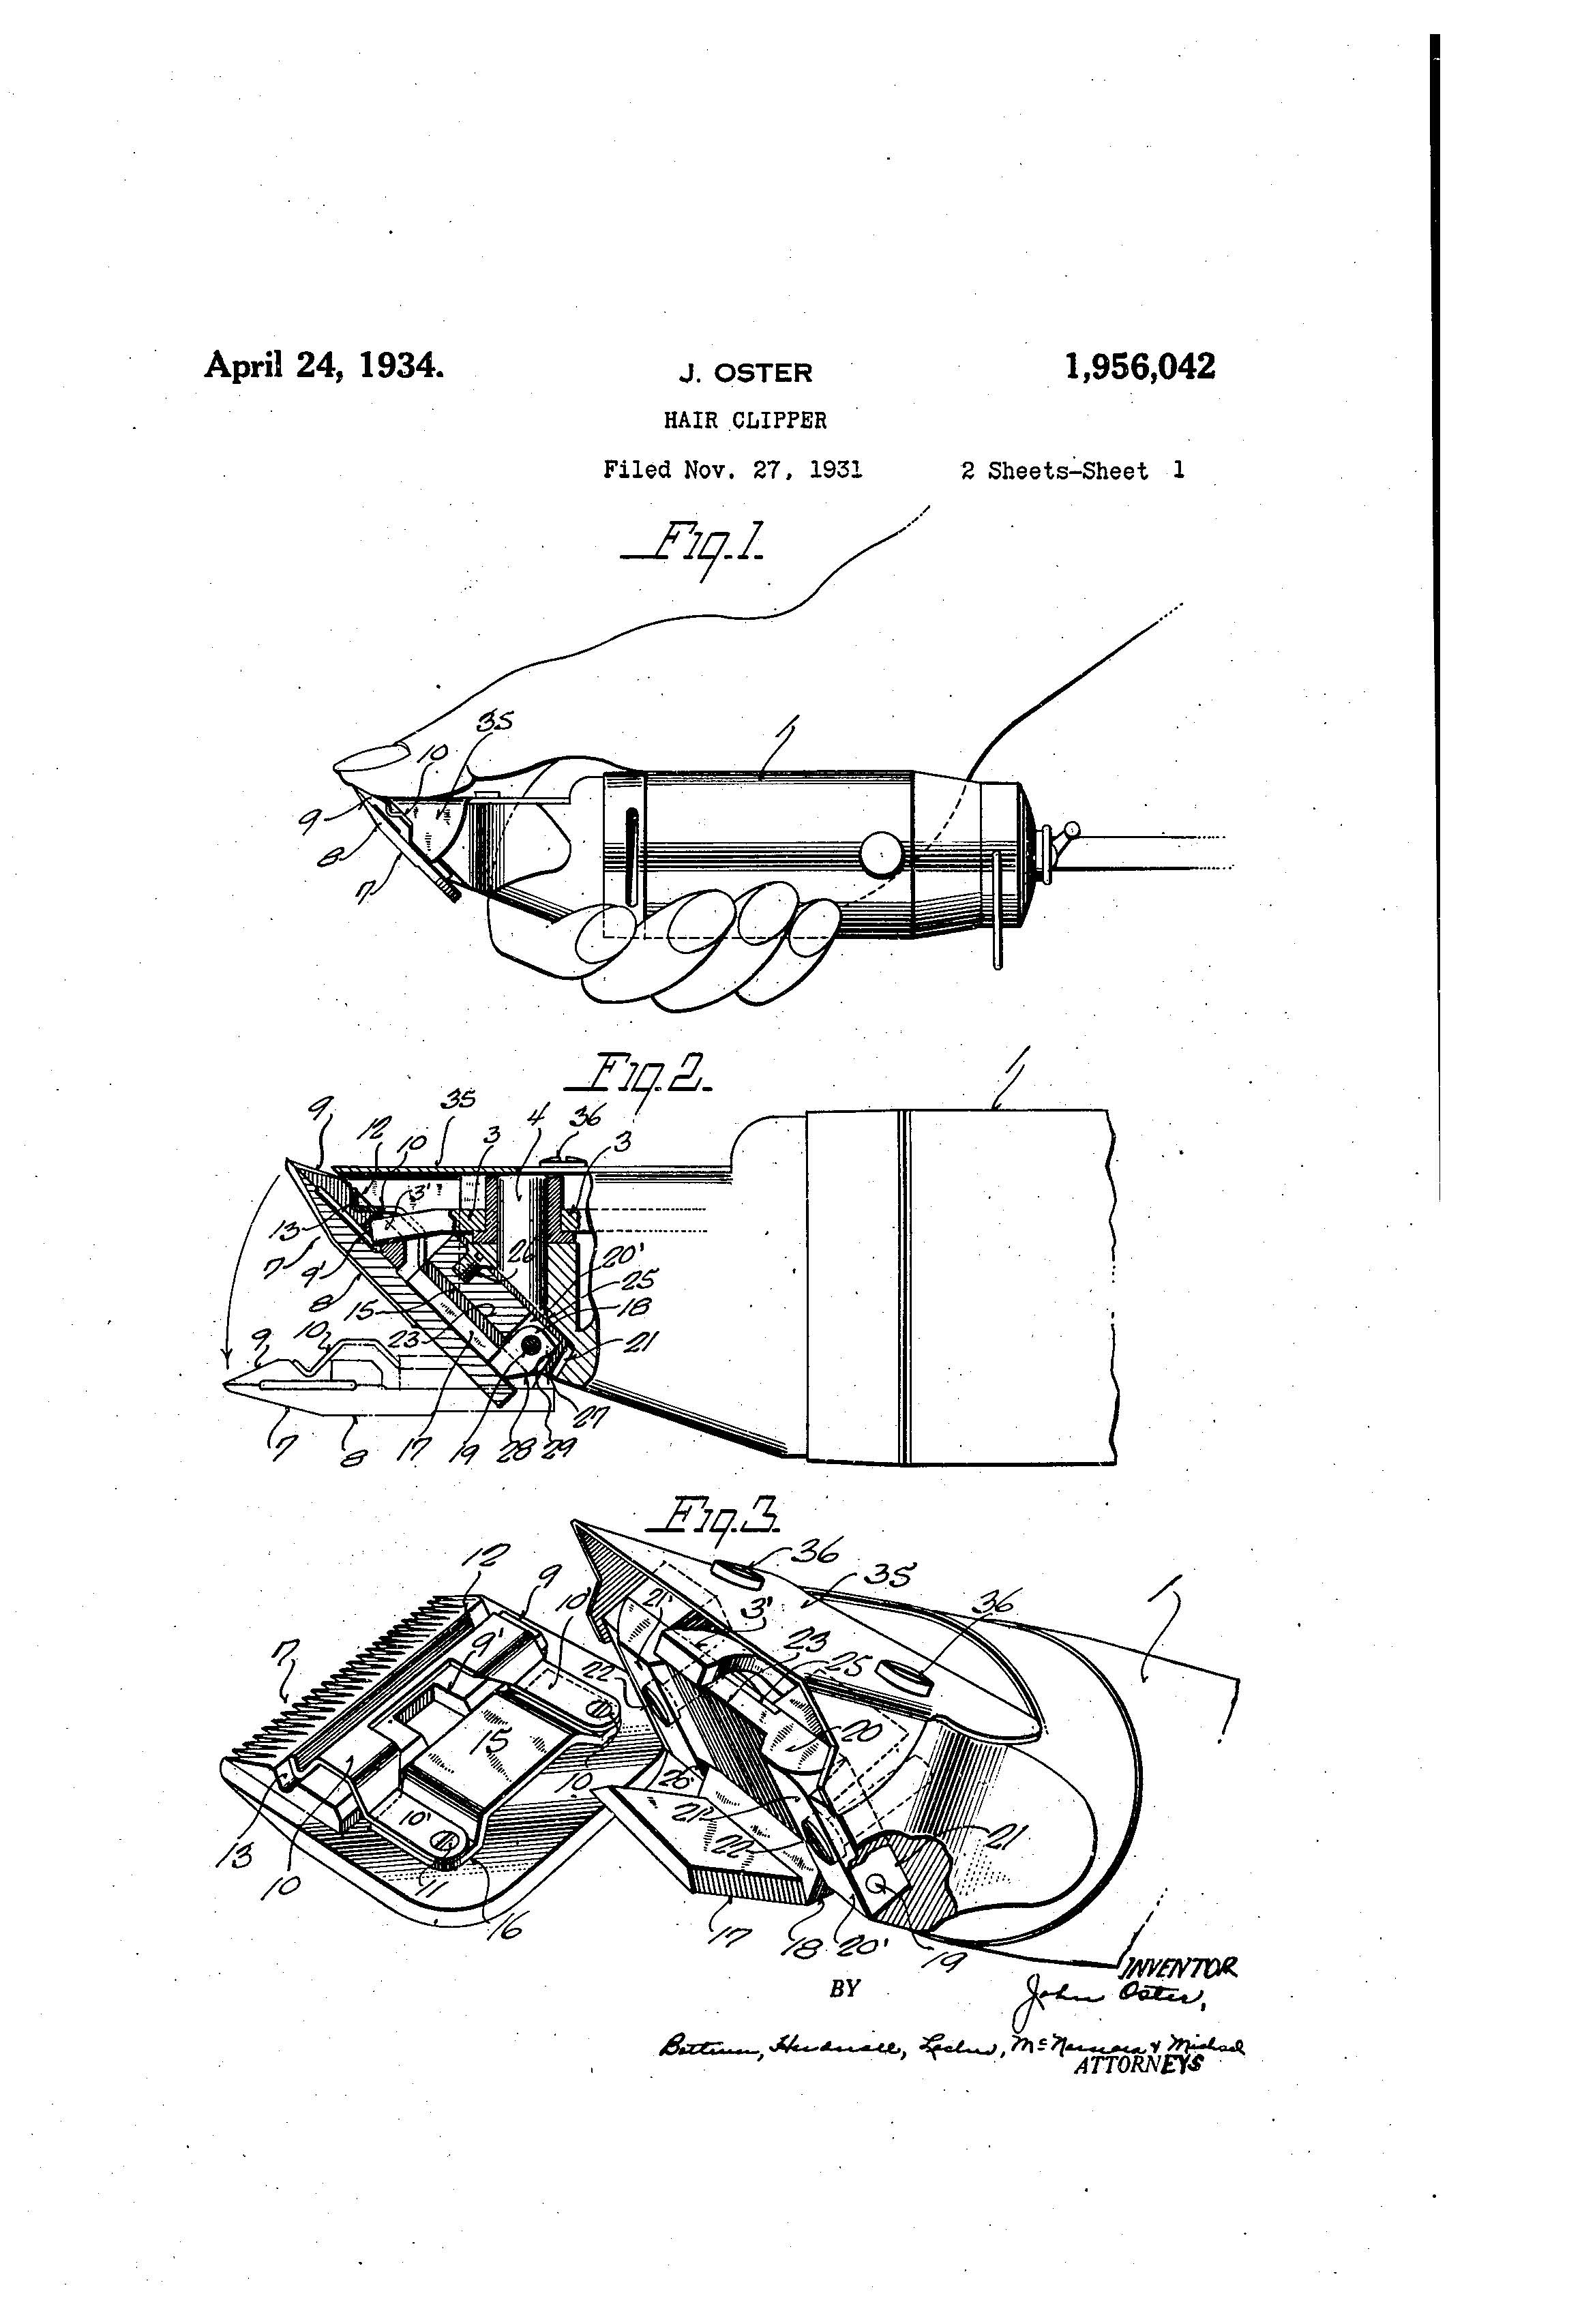 hair clipper assembly